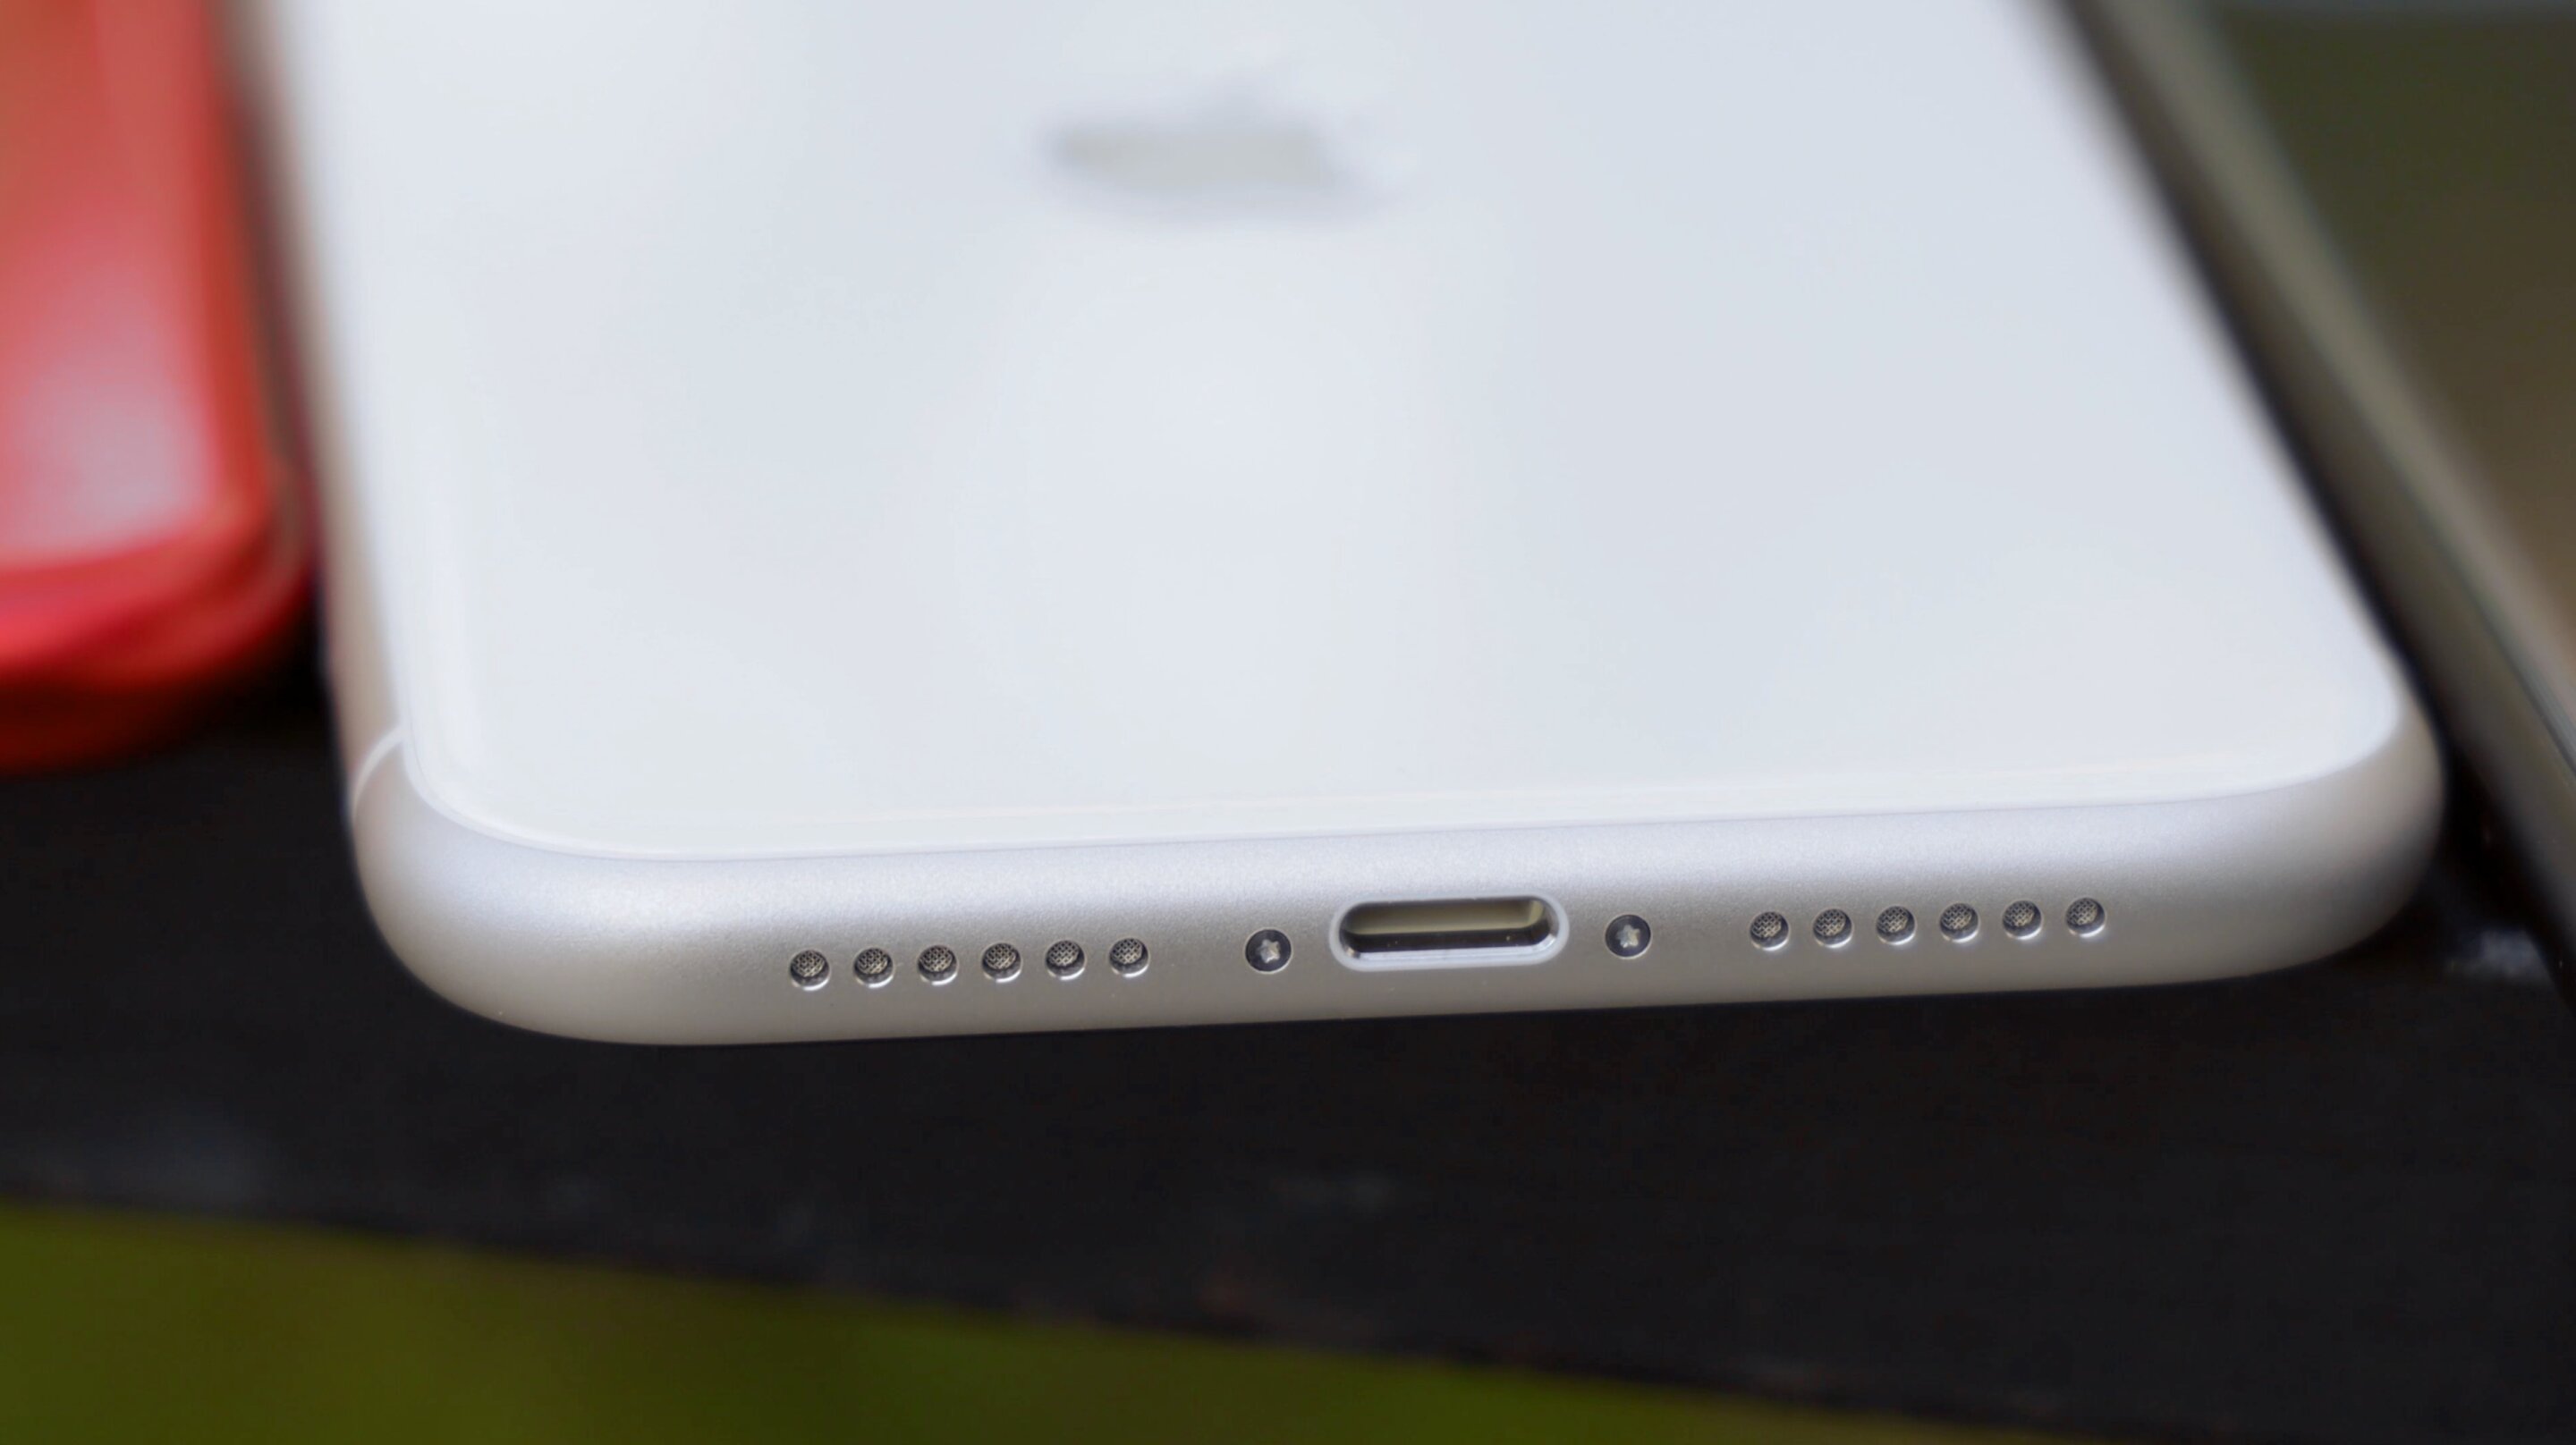 Apple has switched from its Lightning connector to USB-C — we